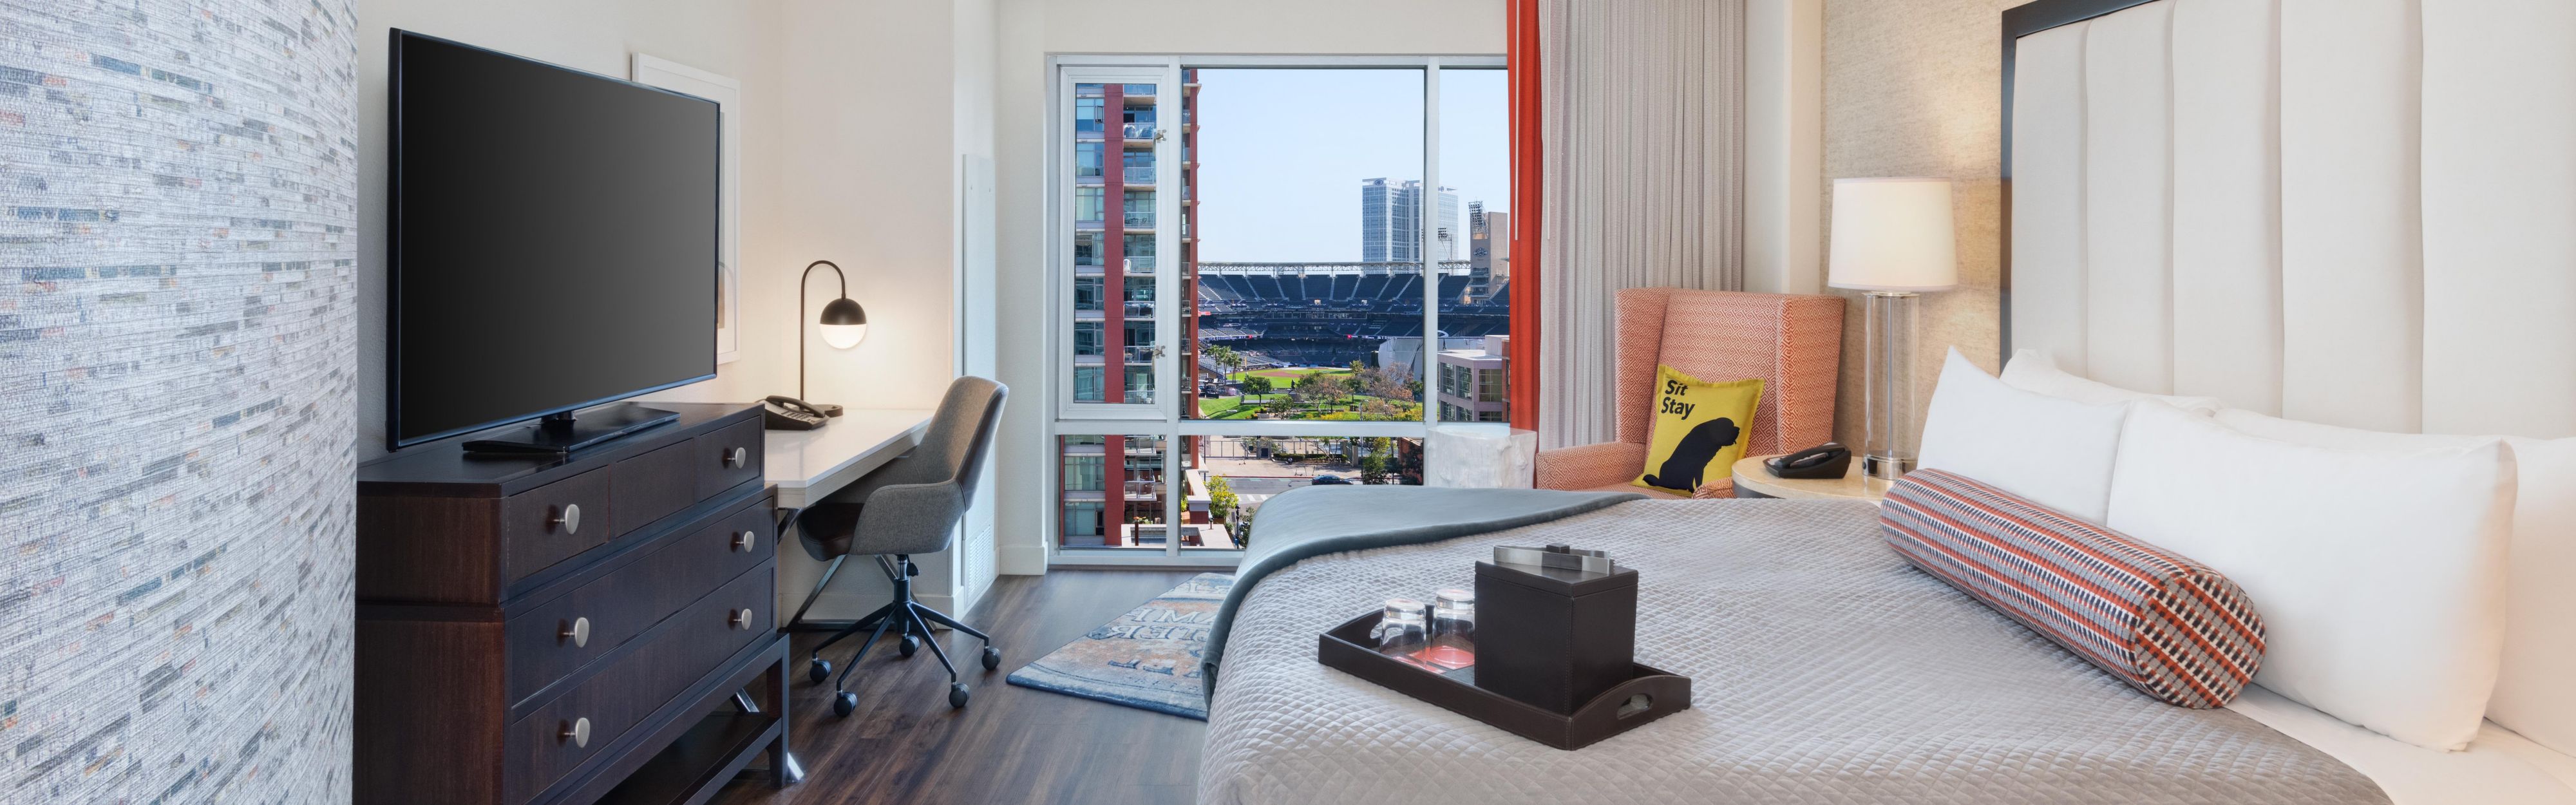 Enjoy our spacious hotel rooms in San Diego near Petco Park